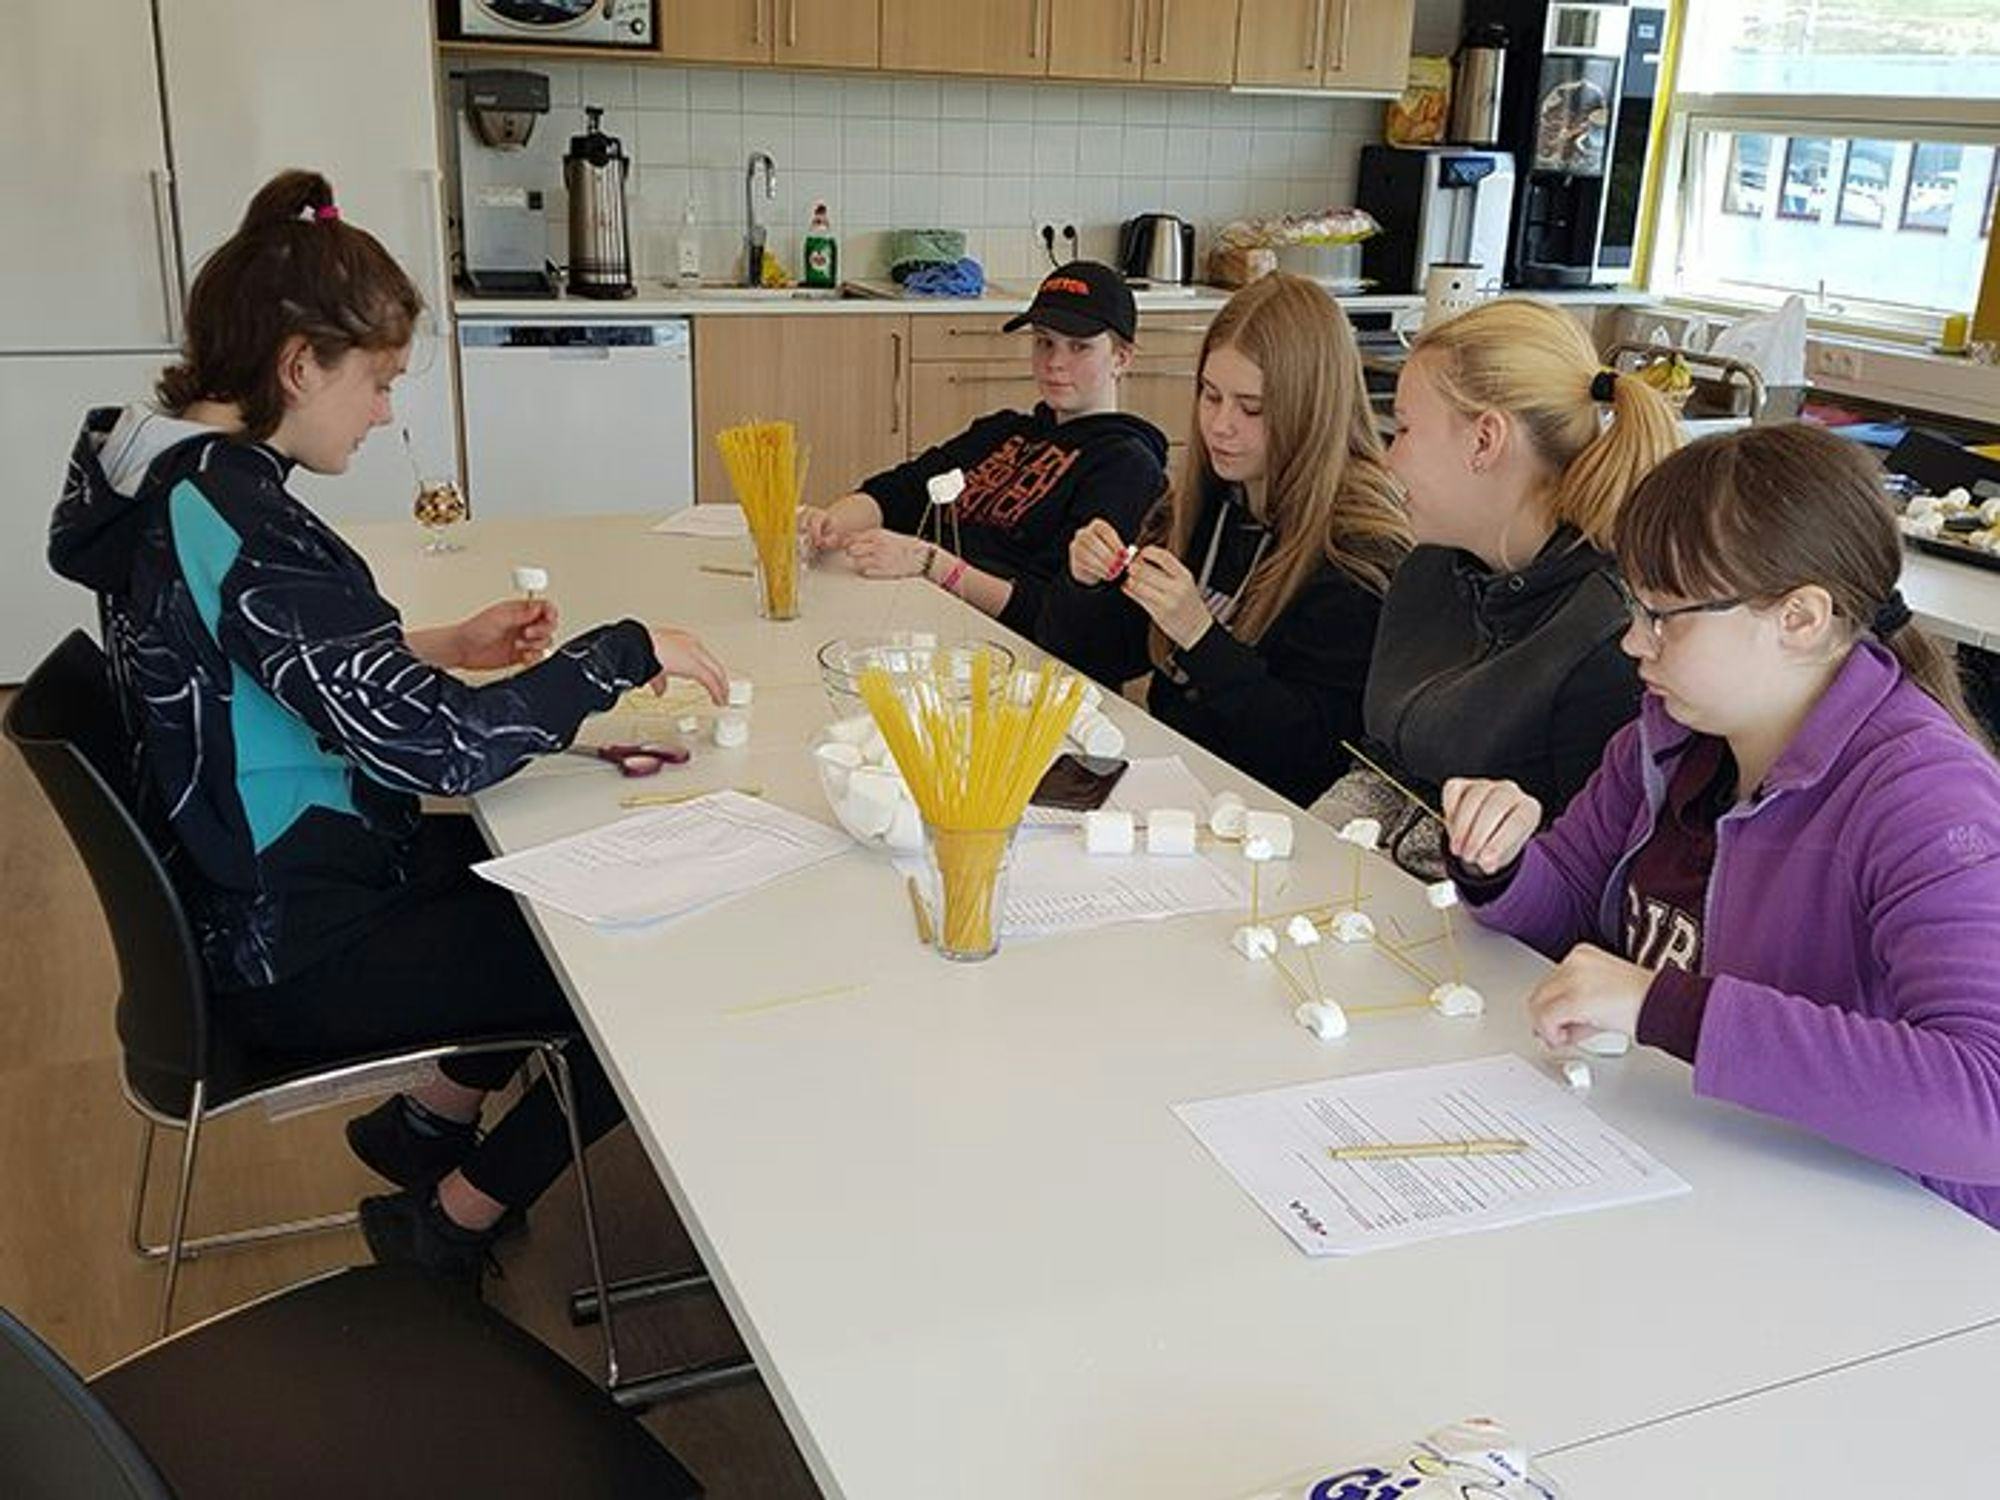 Five young people seated at a long white table, with spaghetti and marshmallow on it